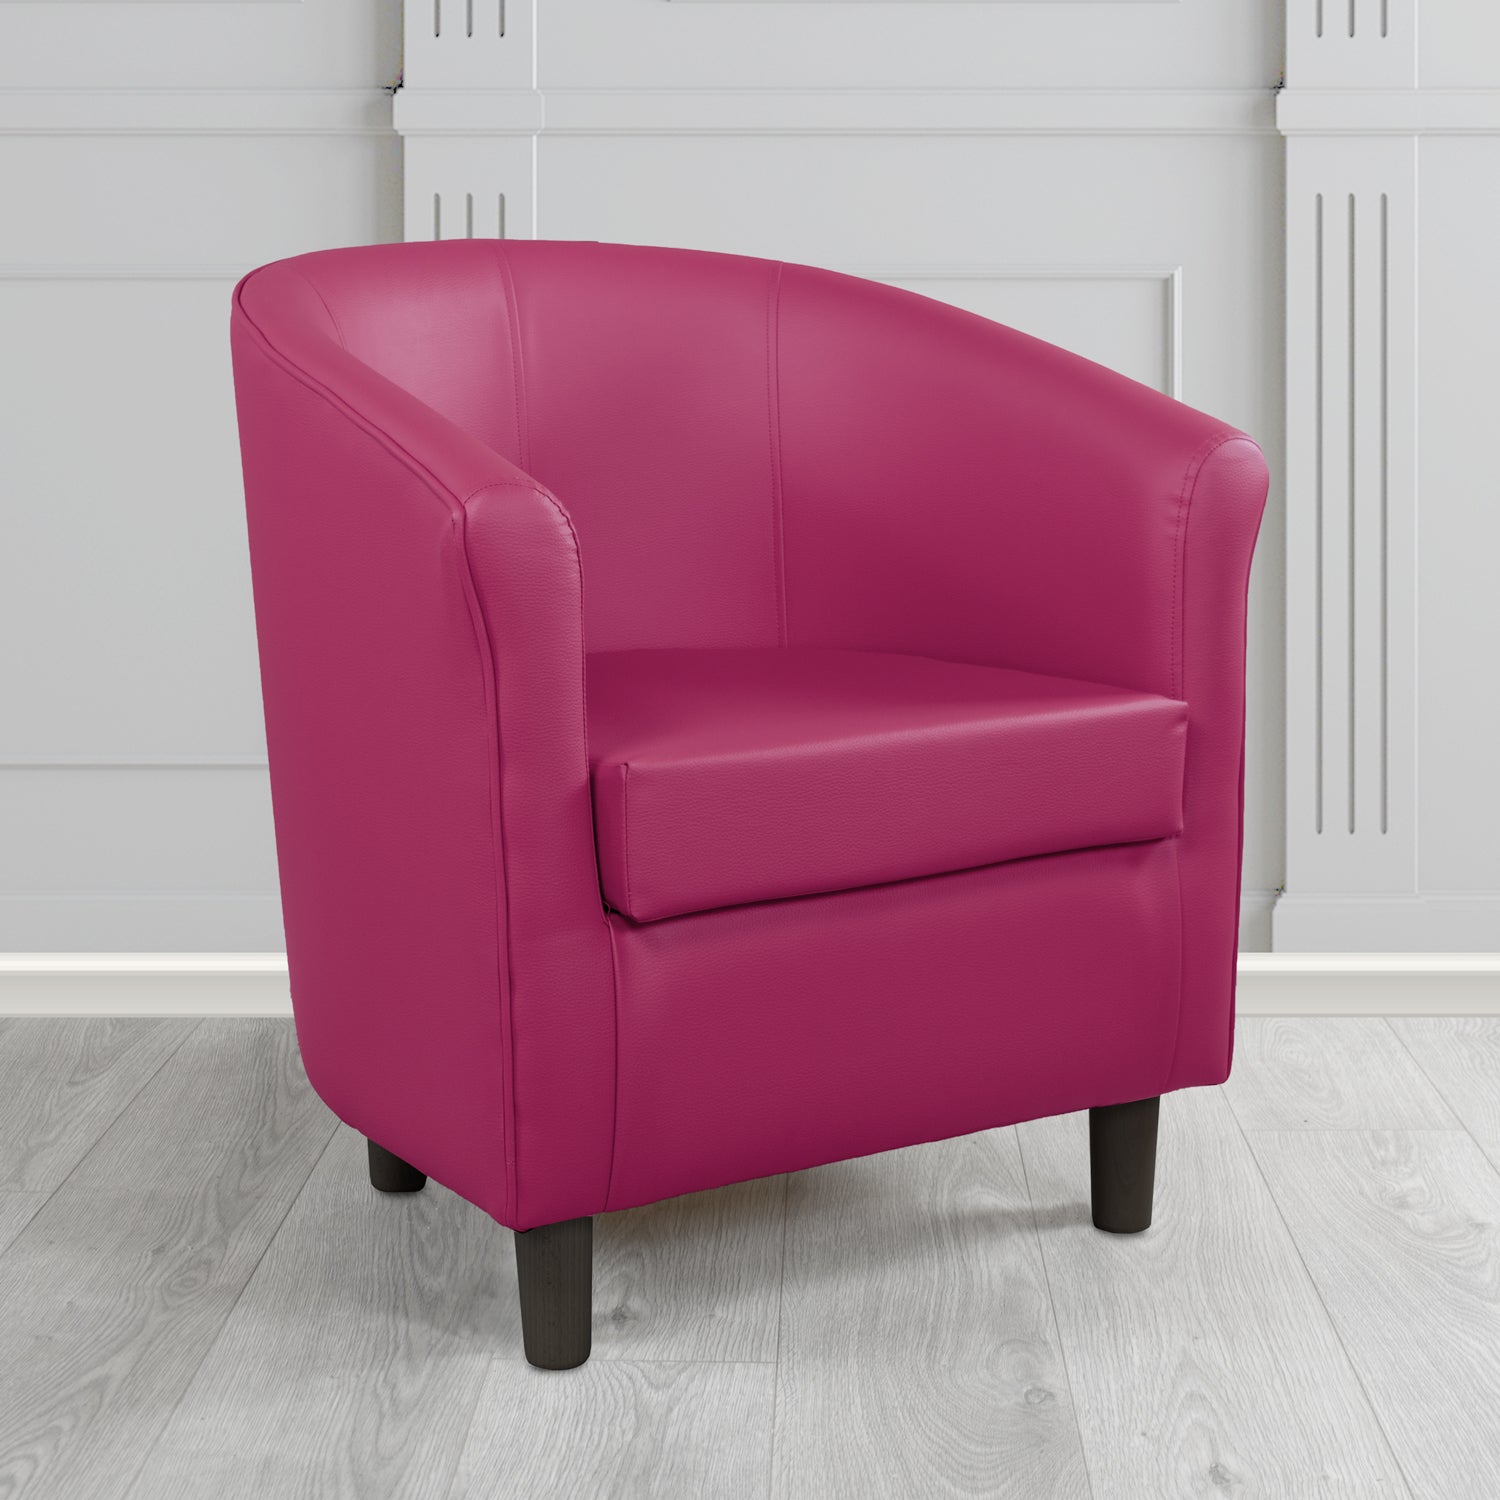 Tuscany Just Colour Raspberry Crush Antimicrobial Crib 5 Contract Faux Leather Tub Chair - The Tub Chair Shop